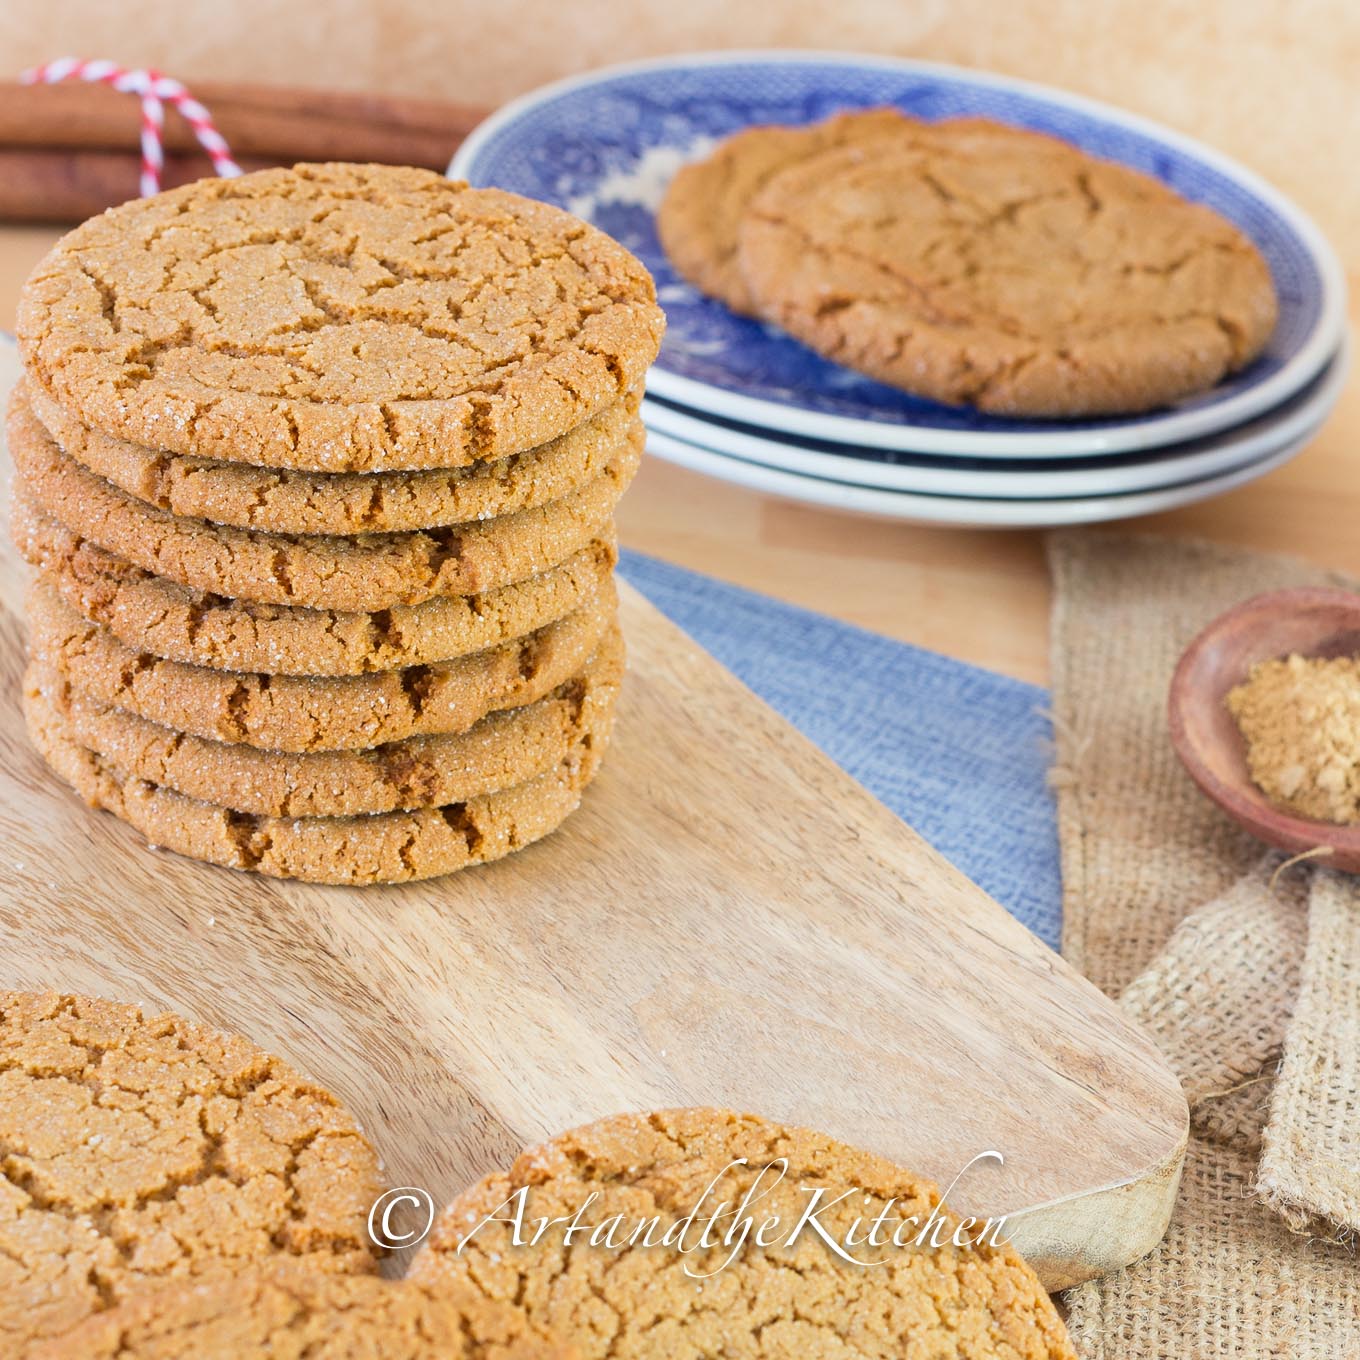 Stack of brown cookies made with ginger on wood board and blue plates